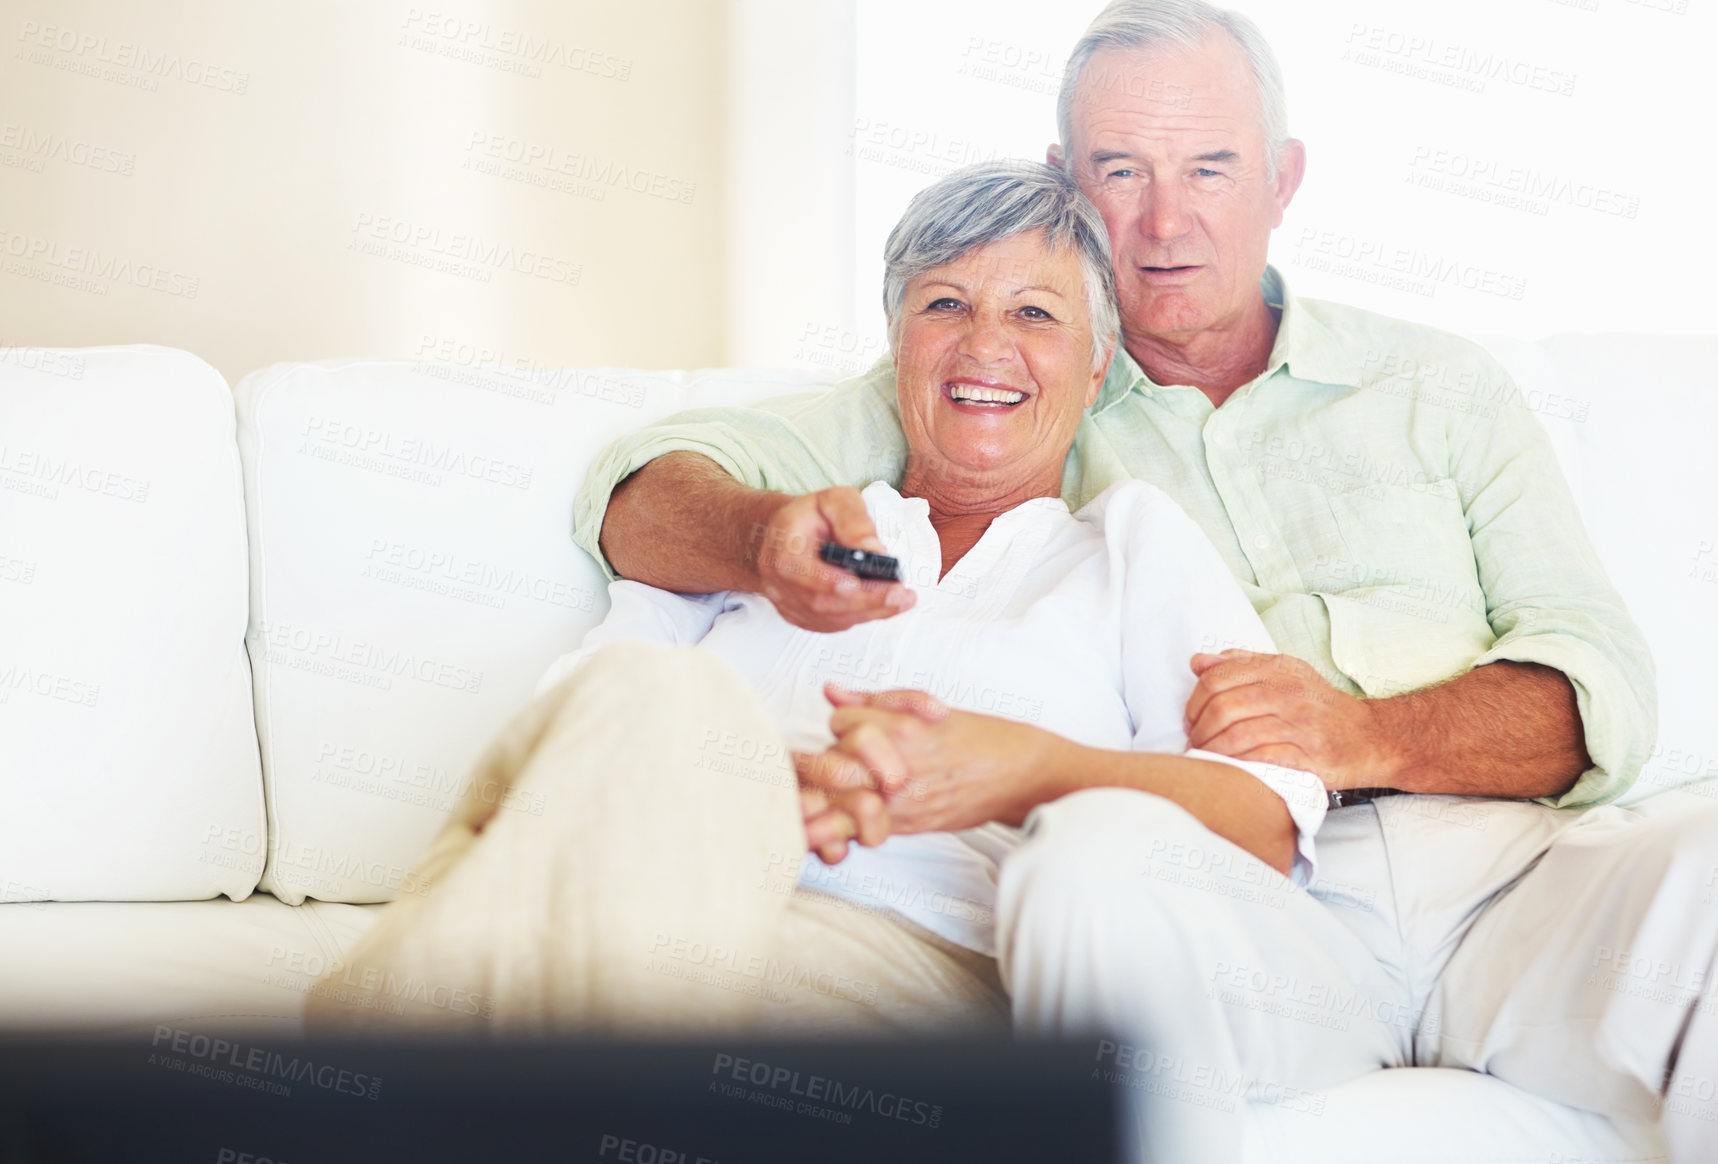 Buy stock photo Mature man changing channels while watching television with smiling woman